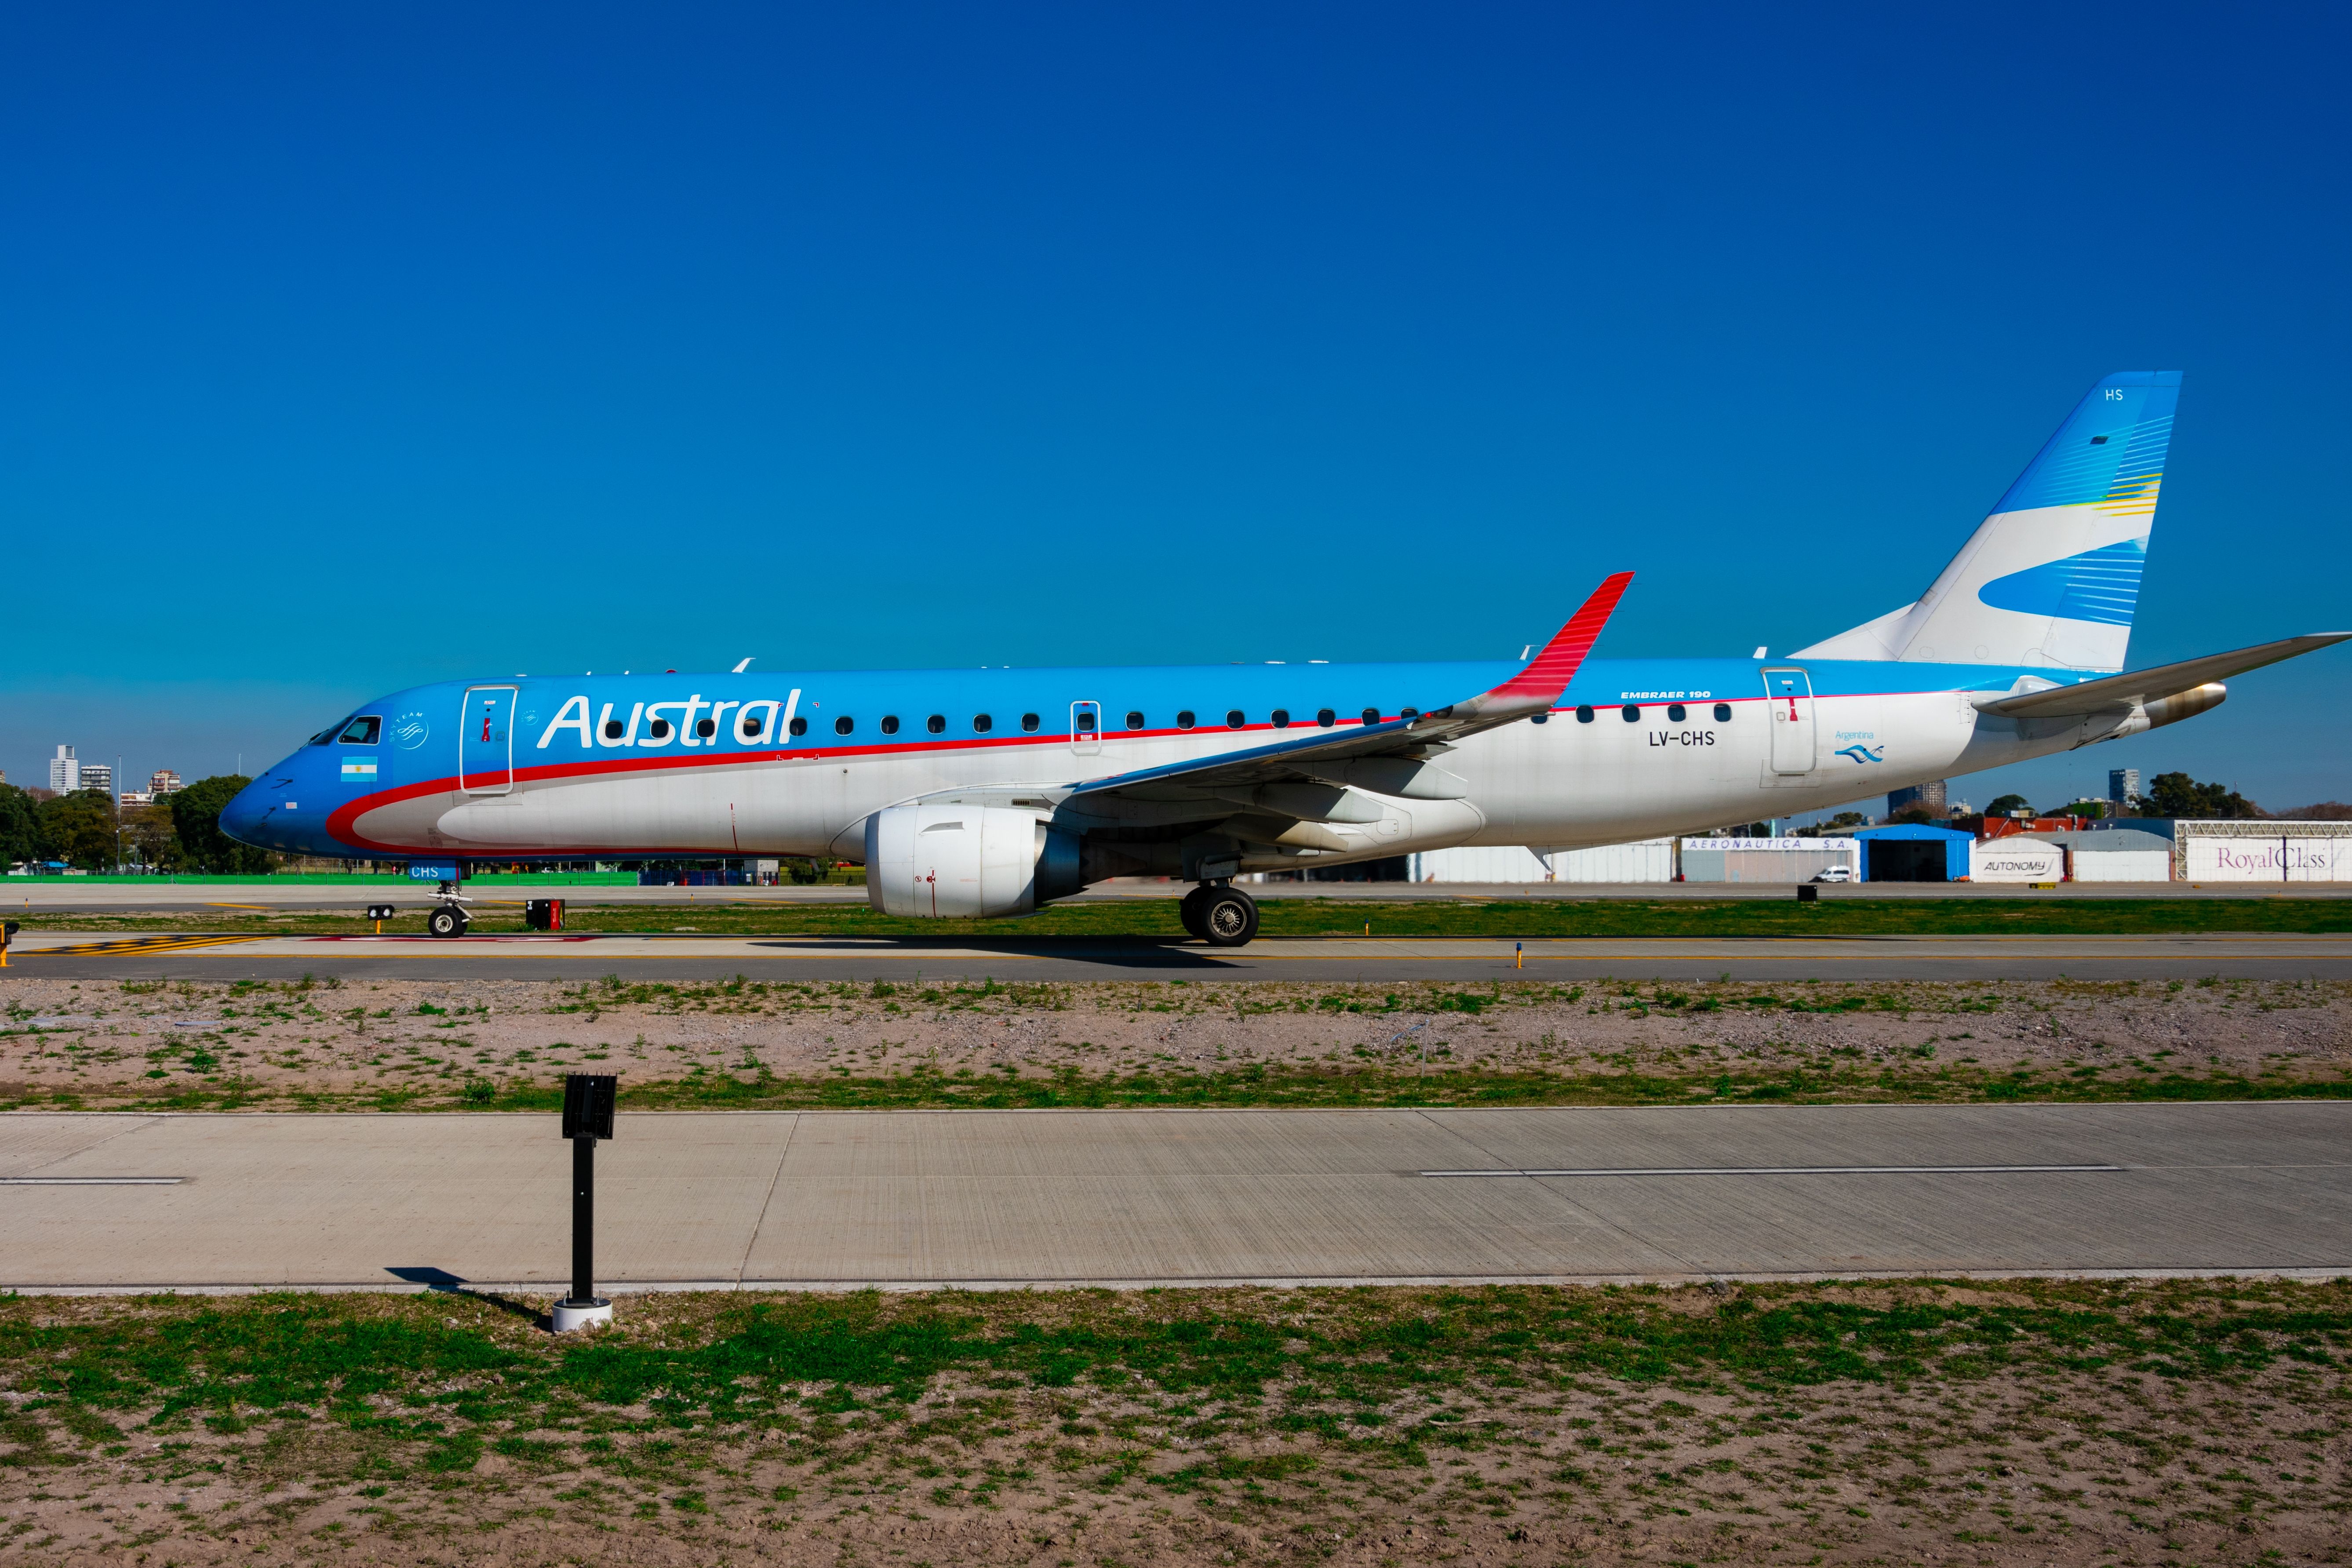 An Aerolíneas Argentinas Embraer E190 with an Austral livery parked 